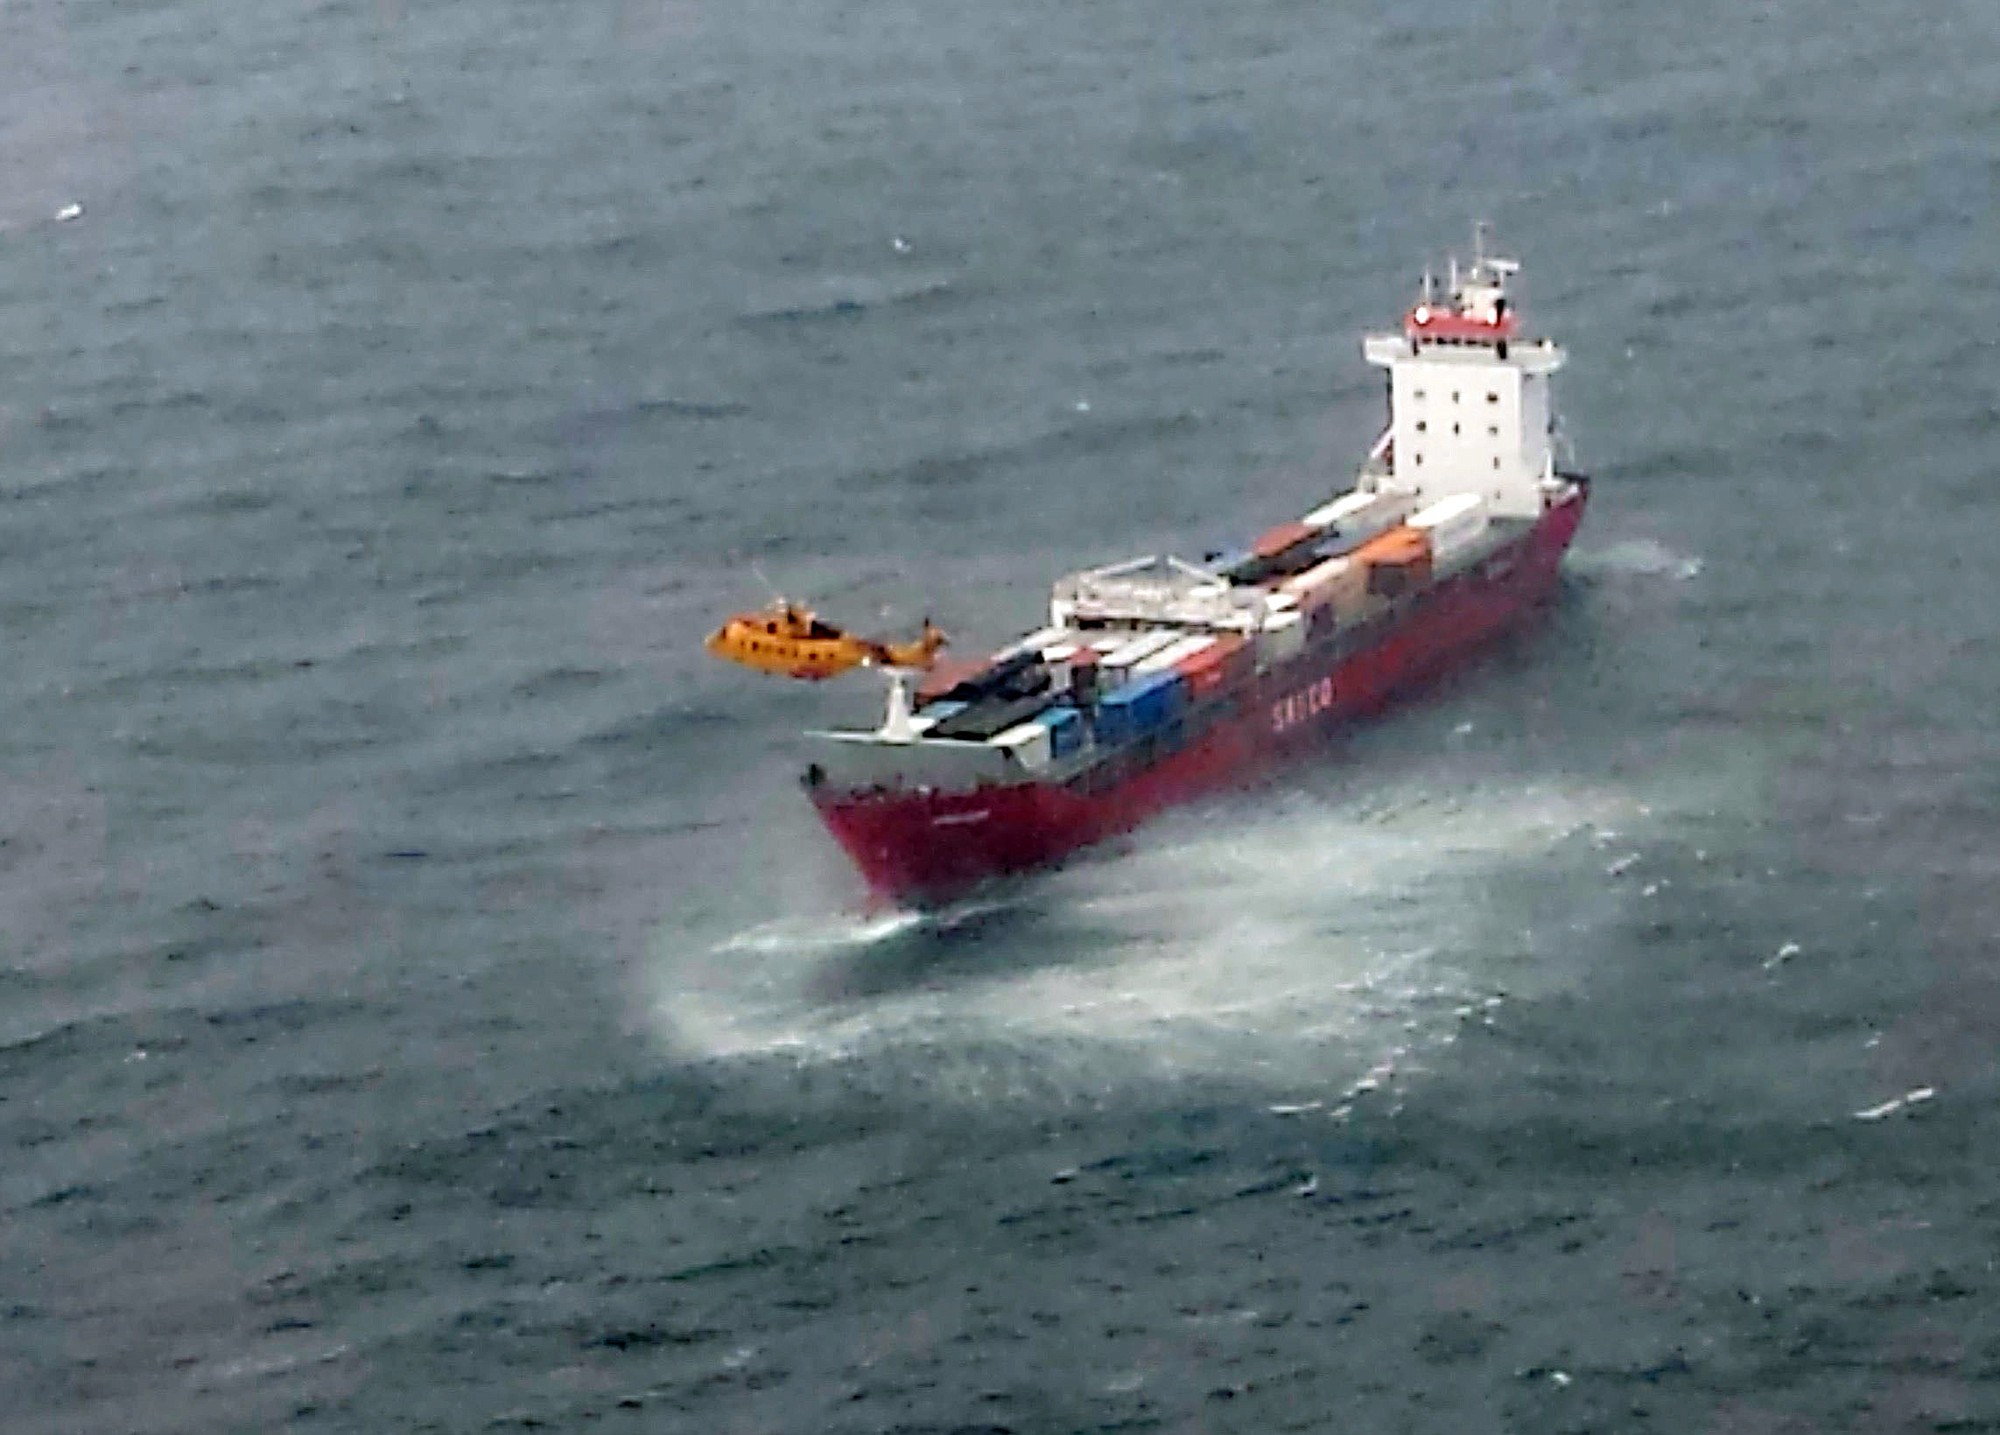 A Canadian Coast Guard helicopter flies near a Russian container ship, carrying hundreds of tons of fuel drifting without power in rough seas off British Columbia's northern coast on Friday.